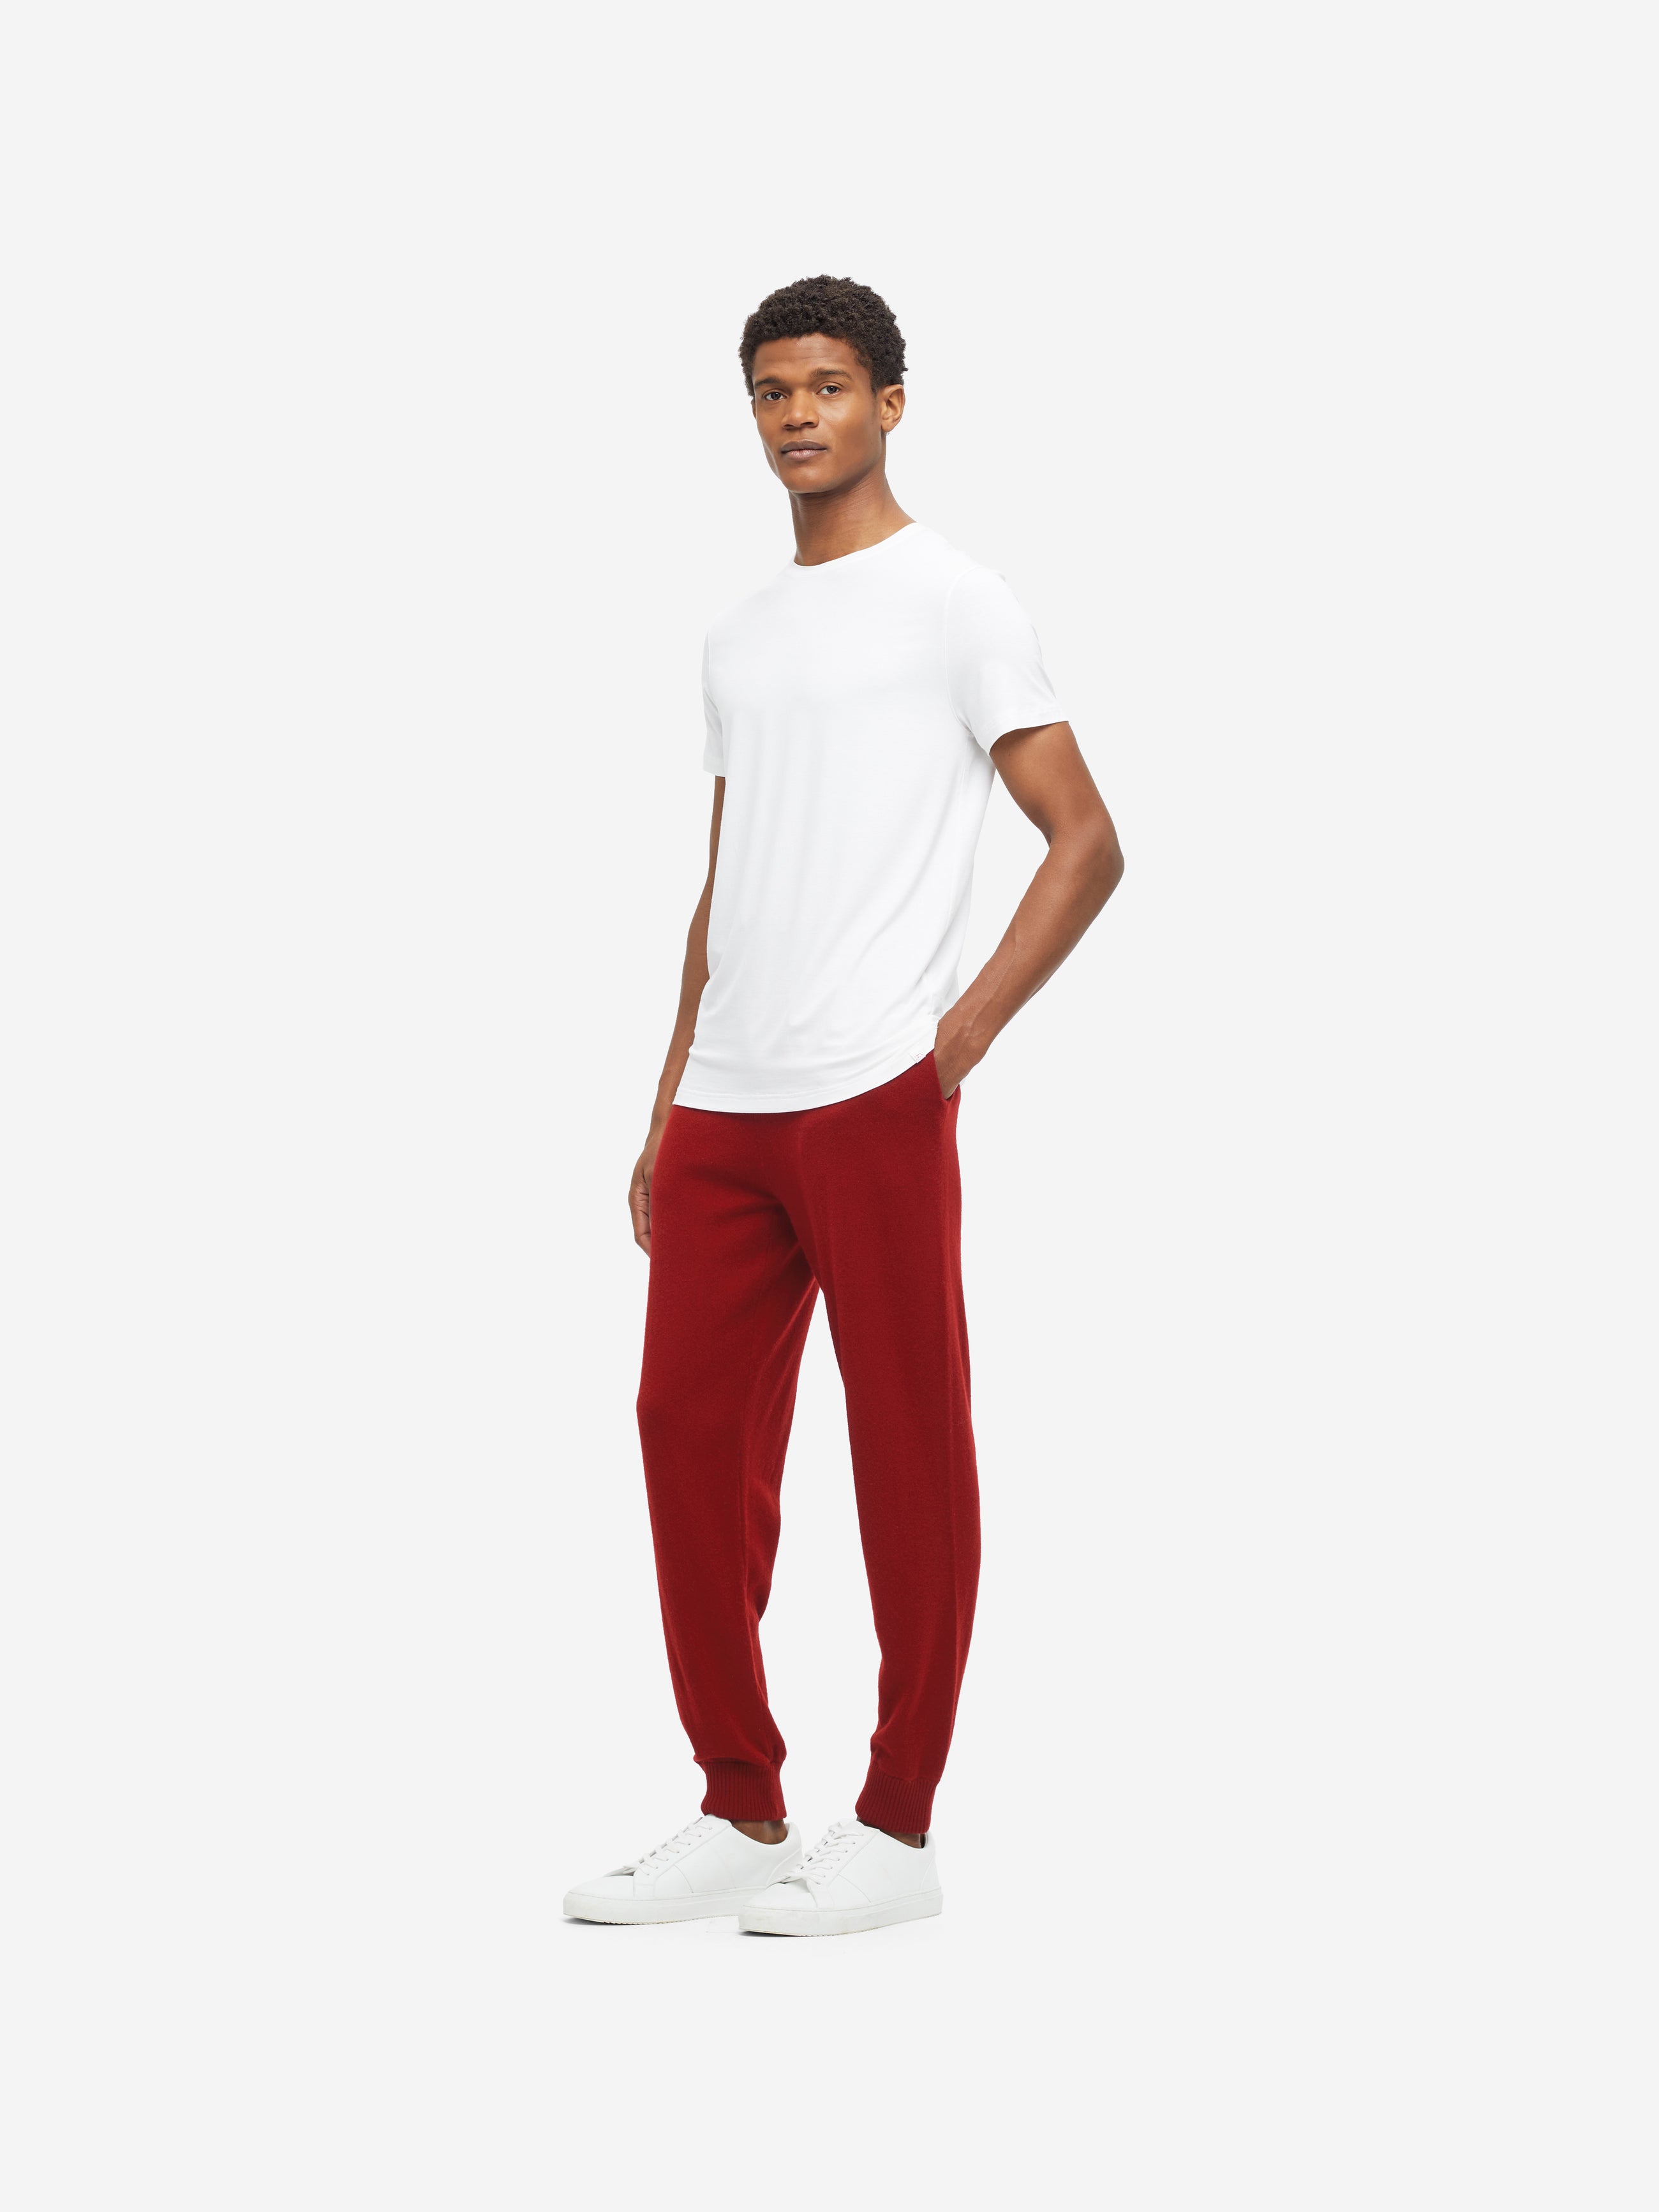 Men's Track Pants Finley Cashmere Deep Red